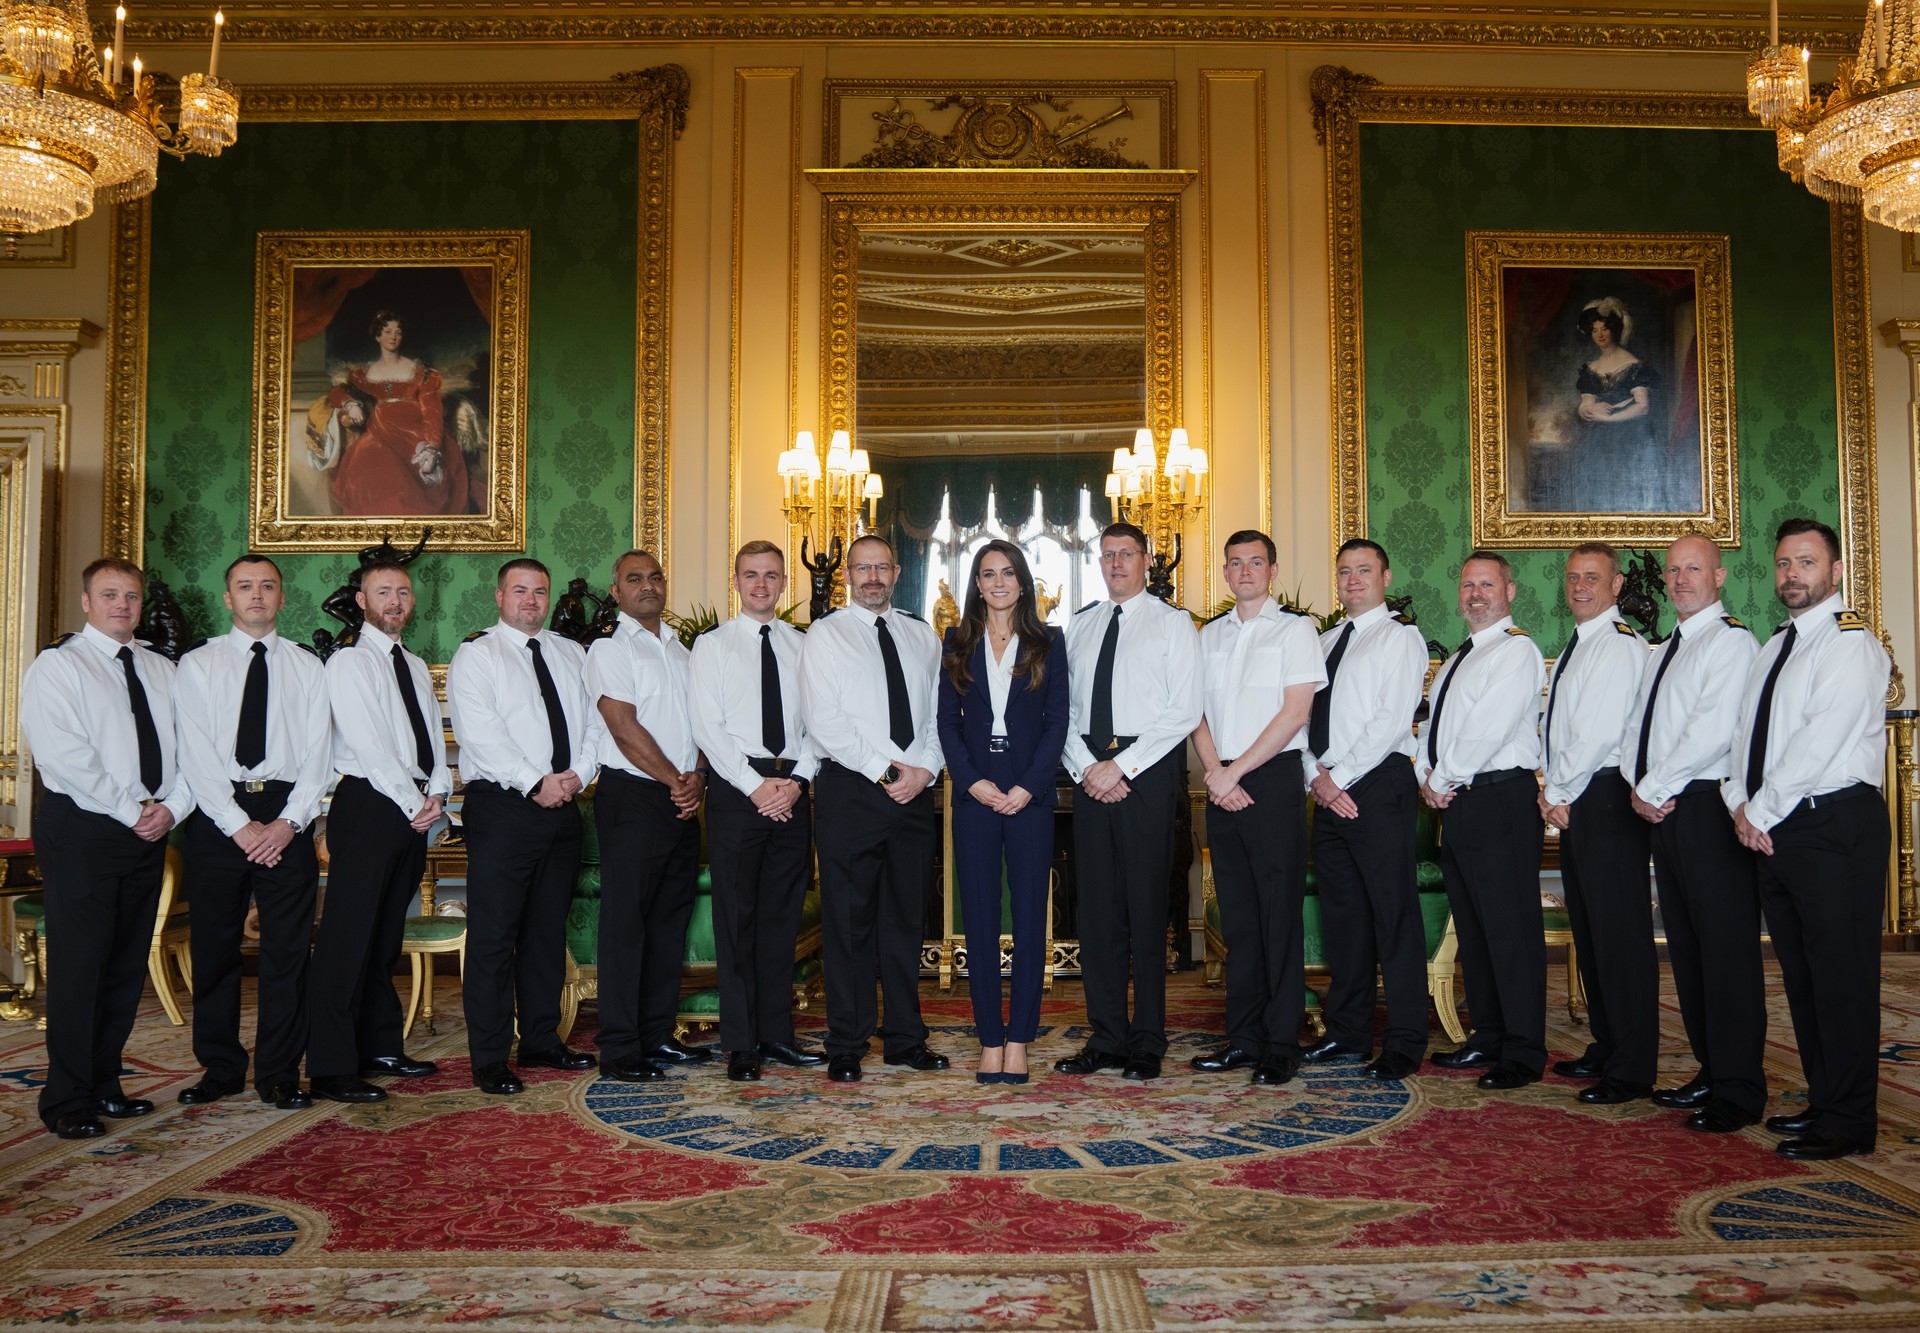 The Princess of Wales meets the ship's company of HMS Glasgow at Windsor Castle.